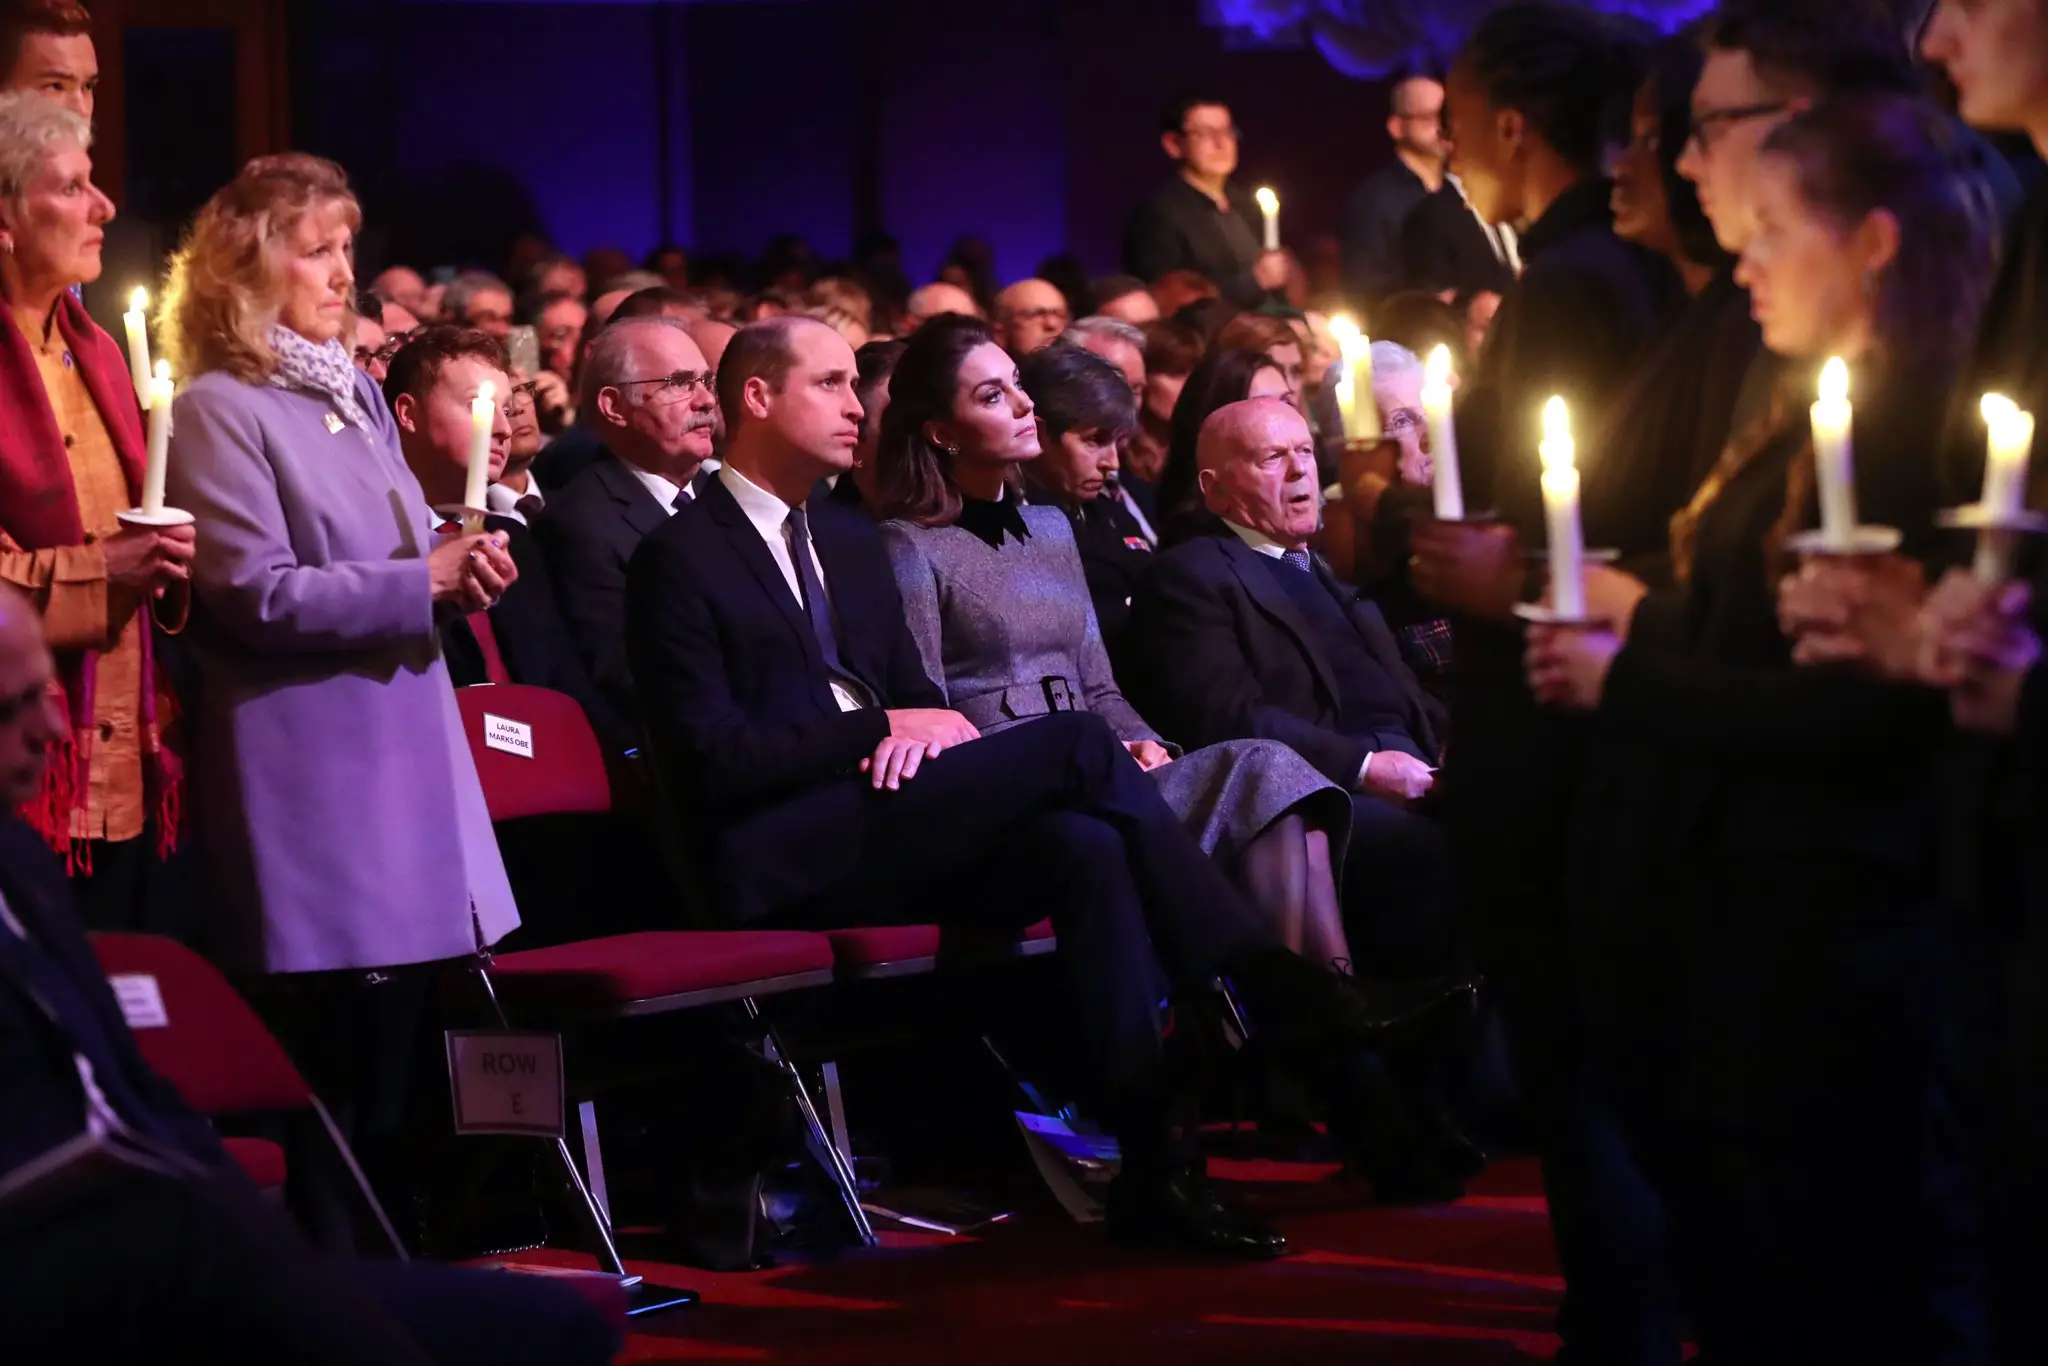 The Duke and Duchess of Cambridge attended the ceremony to mark Holocaust Memorial Day at Central Hall in Westminster, London